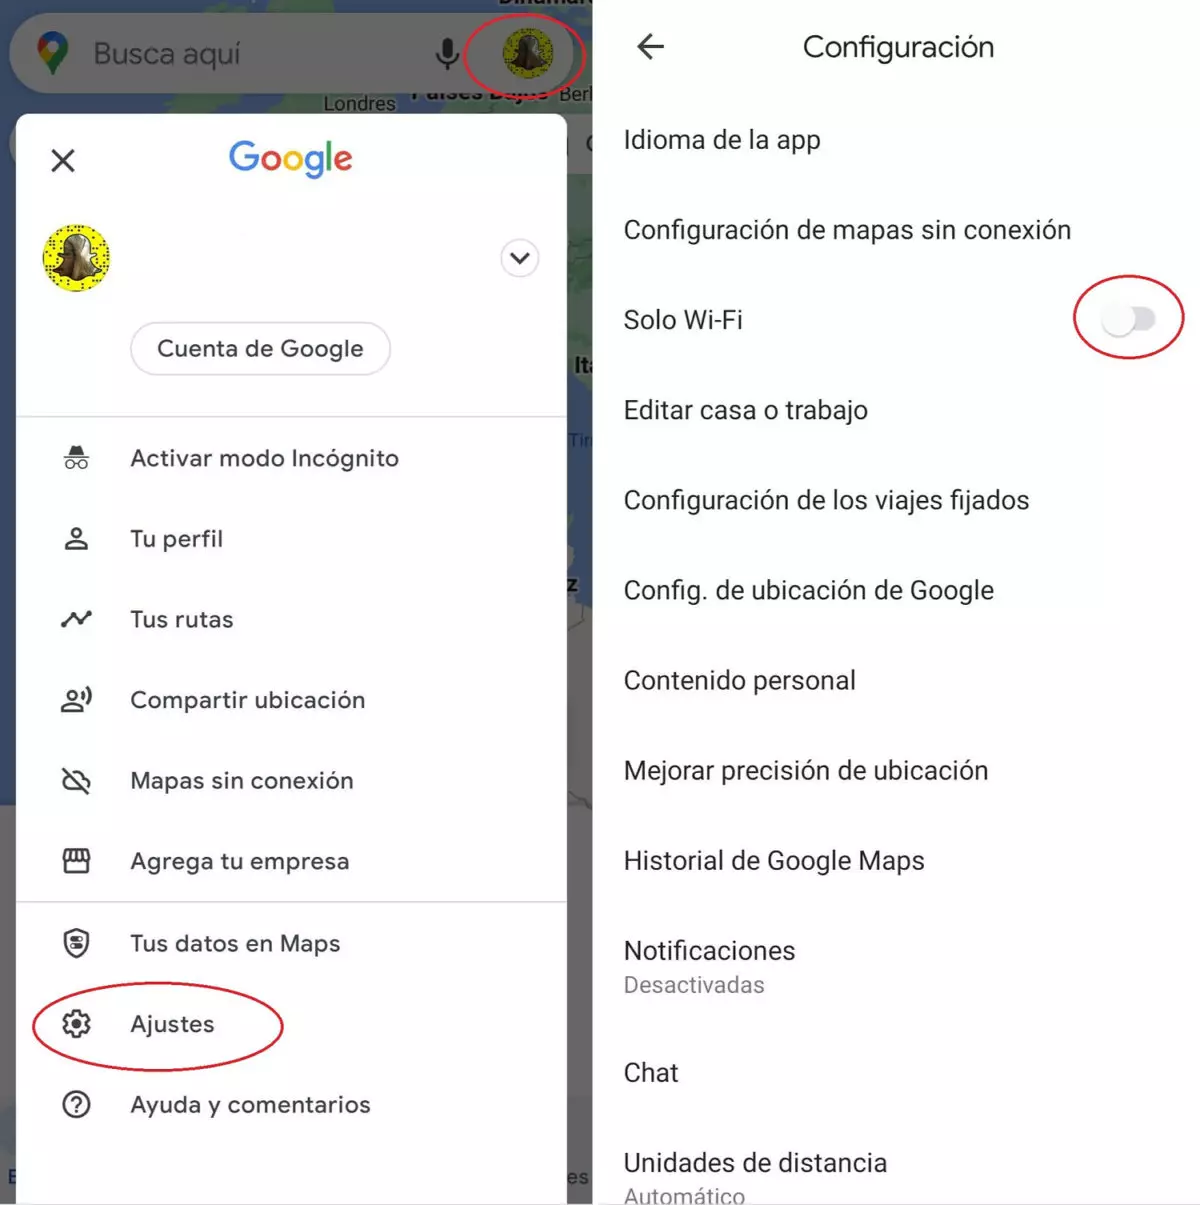 How to use Google Maps without an Internet connection on mobile